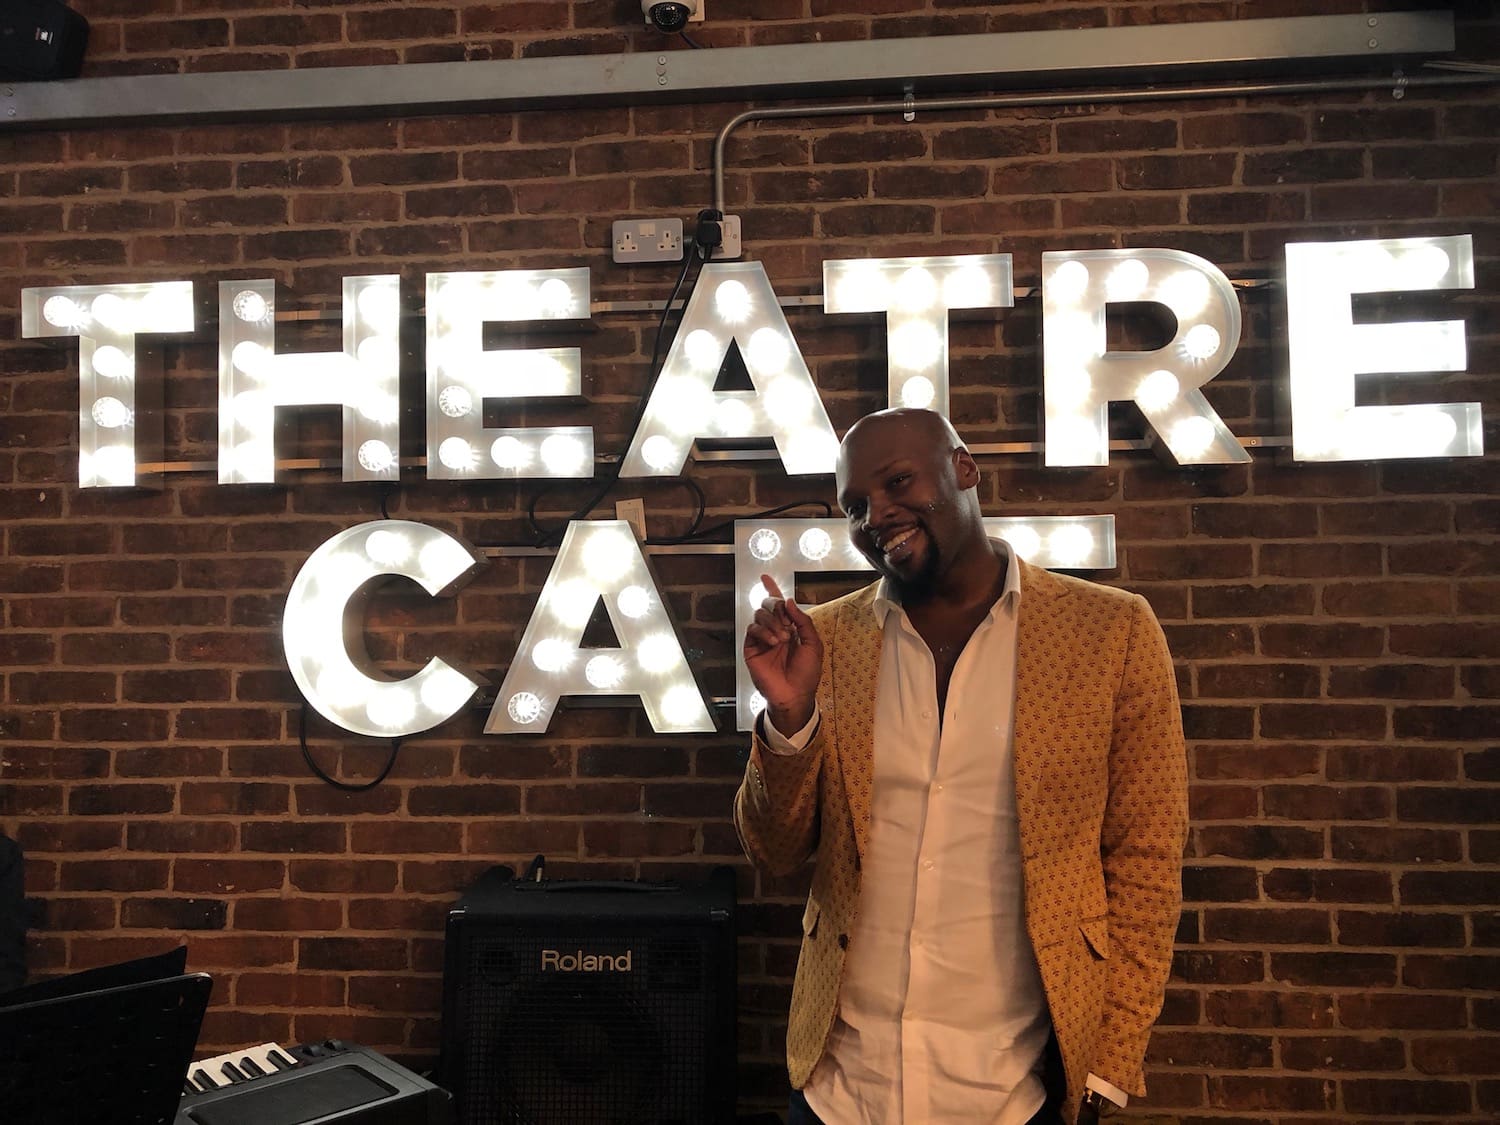 Michael James Scott at The Theatre Cafe